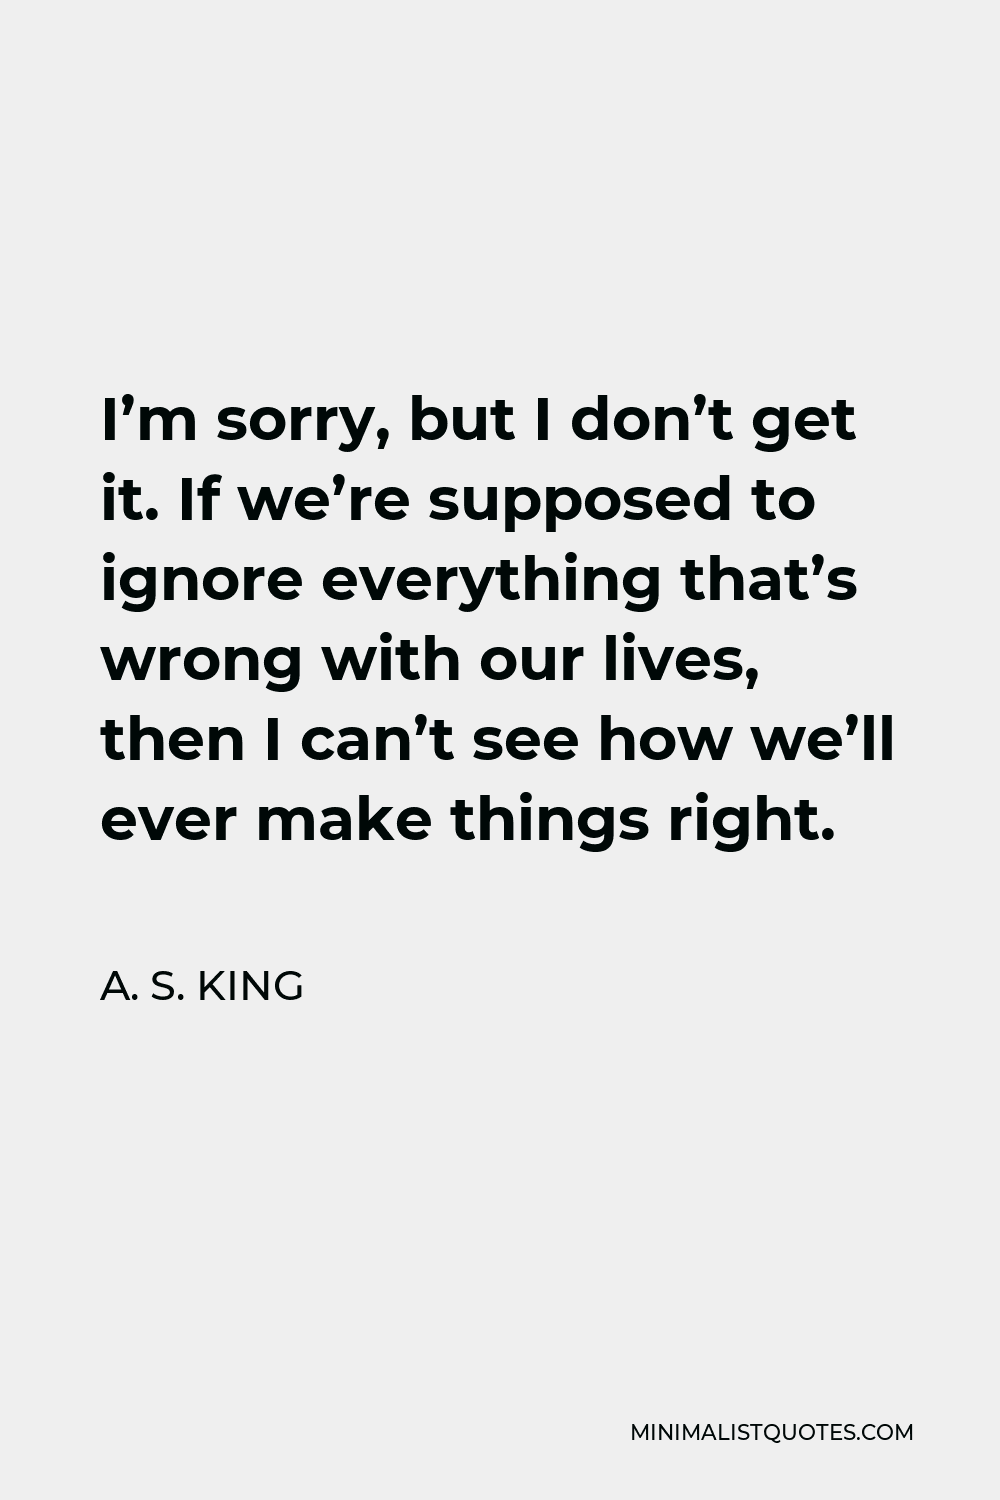 A. S. King Quote - I’m sorry, but I don’t get it. If we’re supposed to ignore everything that’s wrong with our lives, then I can’t see how we’ll ever make things right.